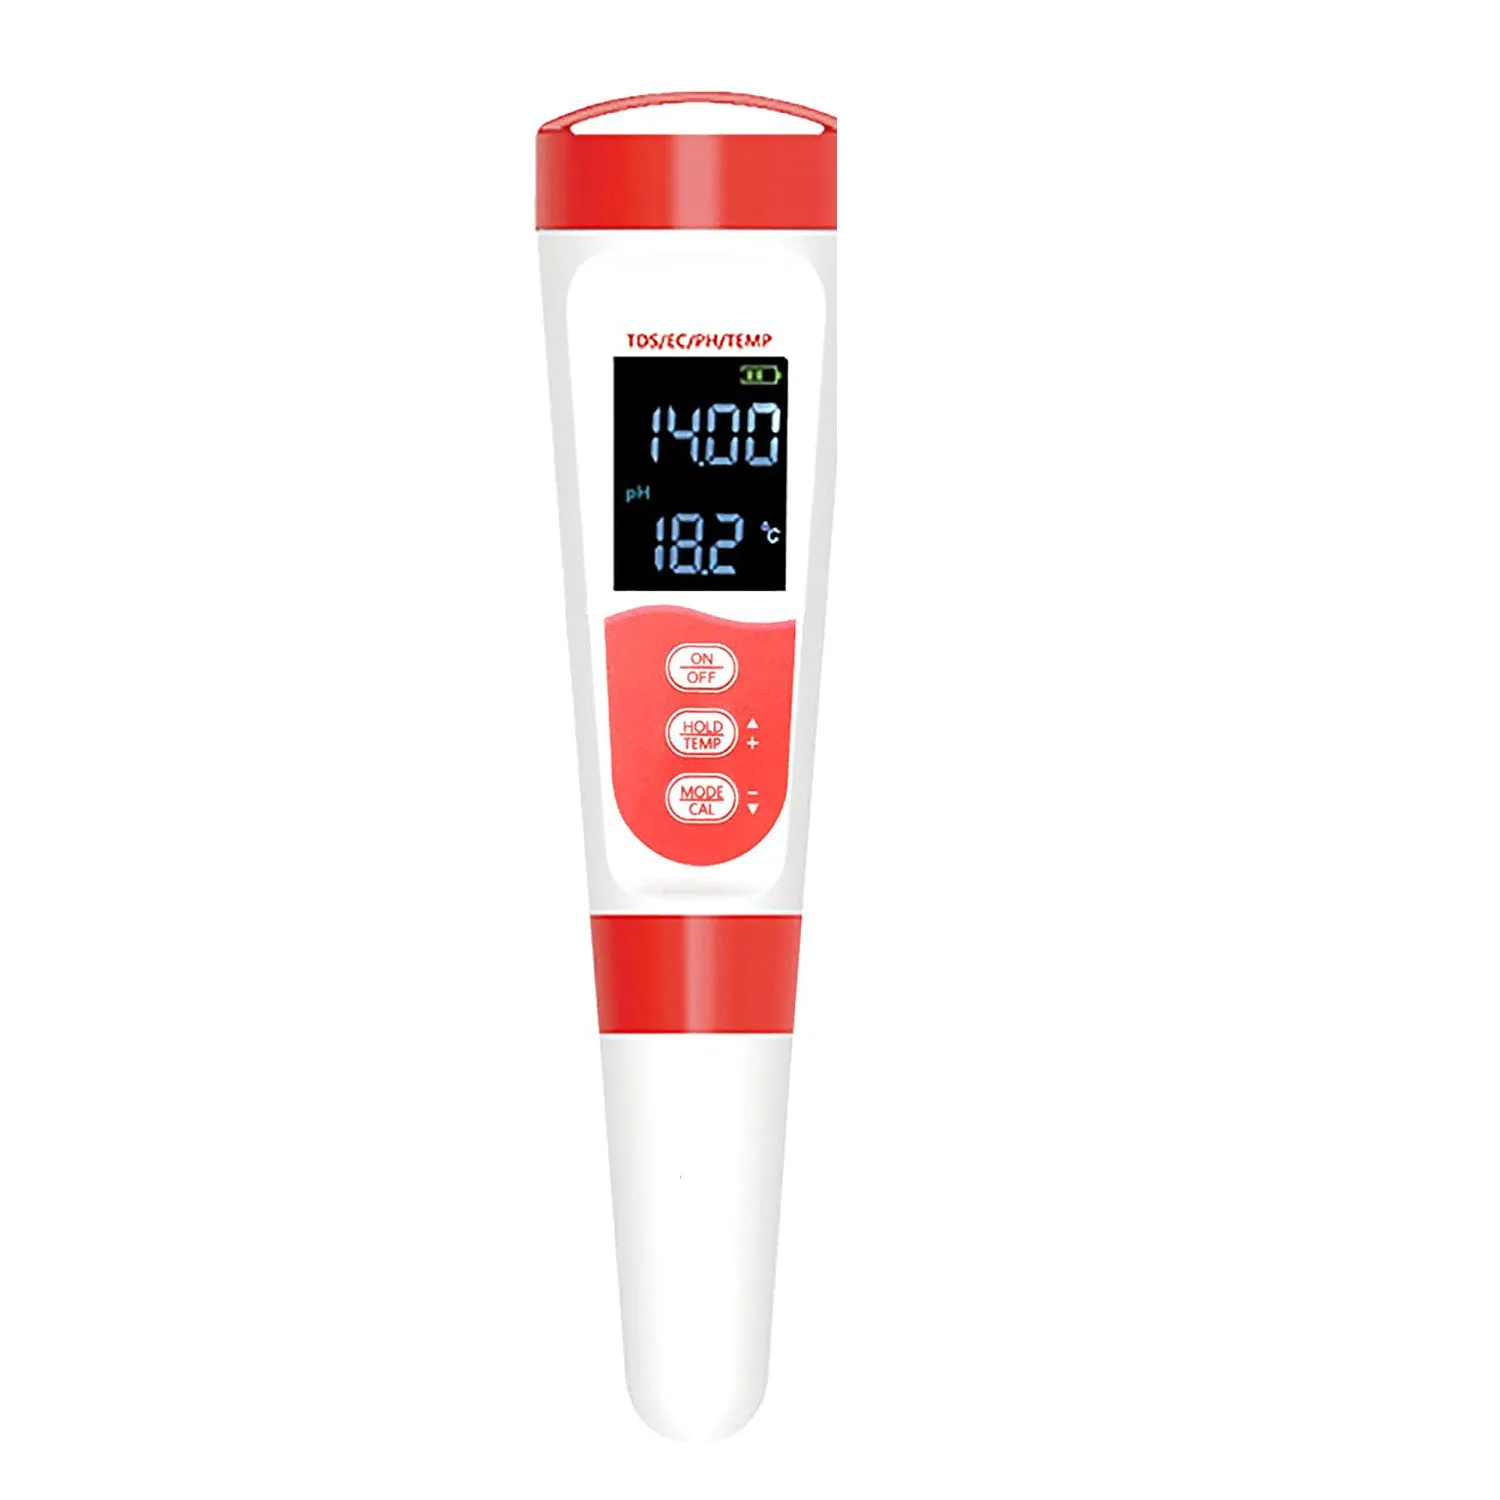 

Water Tester Digital PH Meter with ATC 4 in 1 PH/EC/TDS/Thermometer 0.01 Resolution High Precision Pen Tester